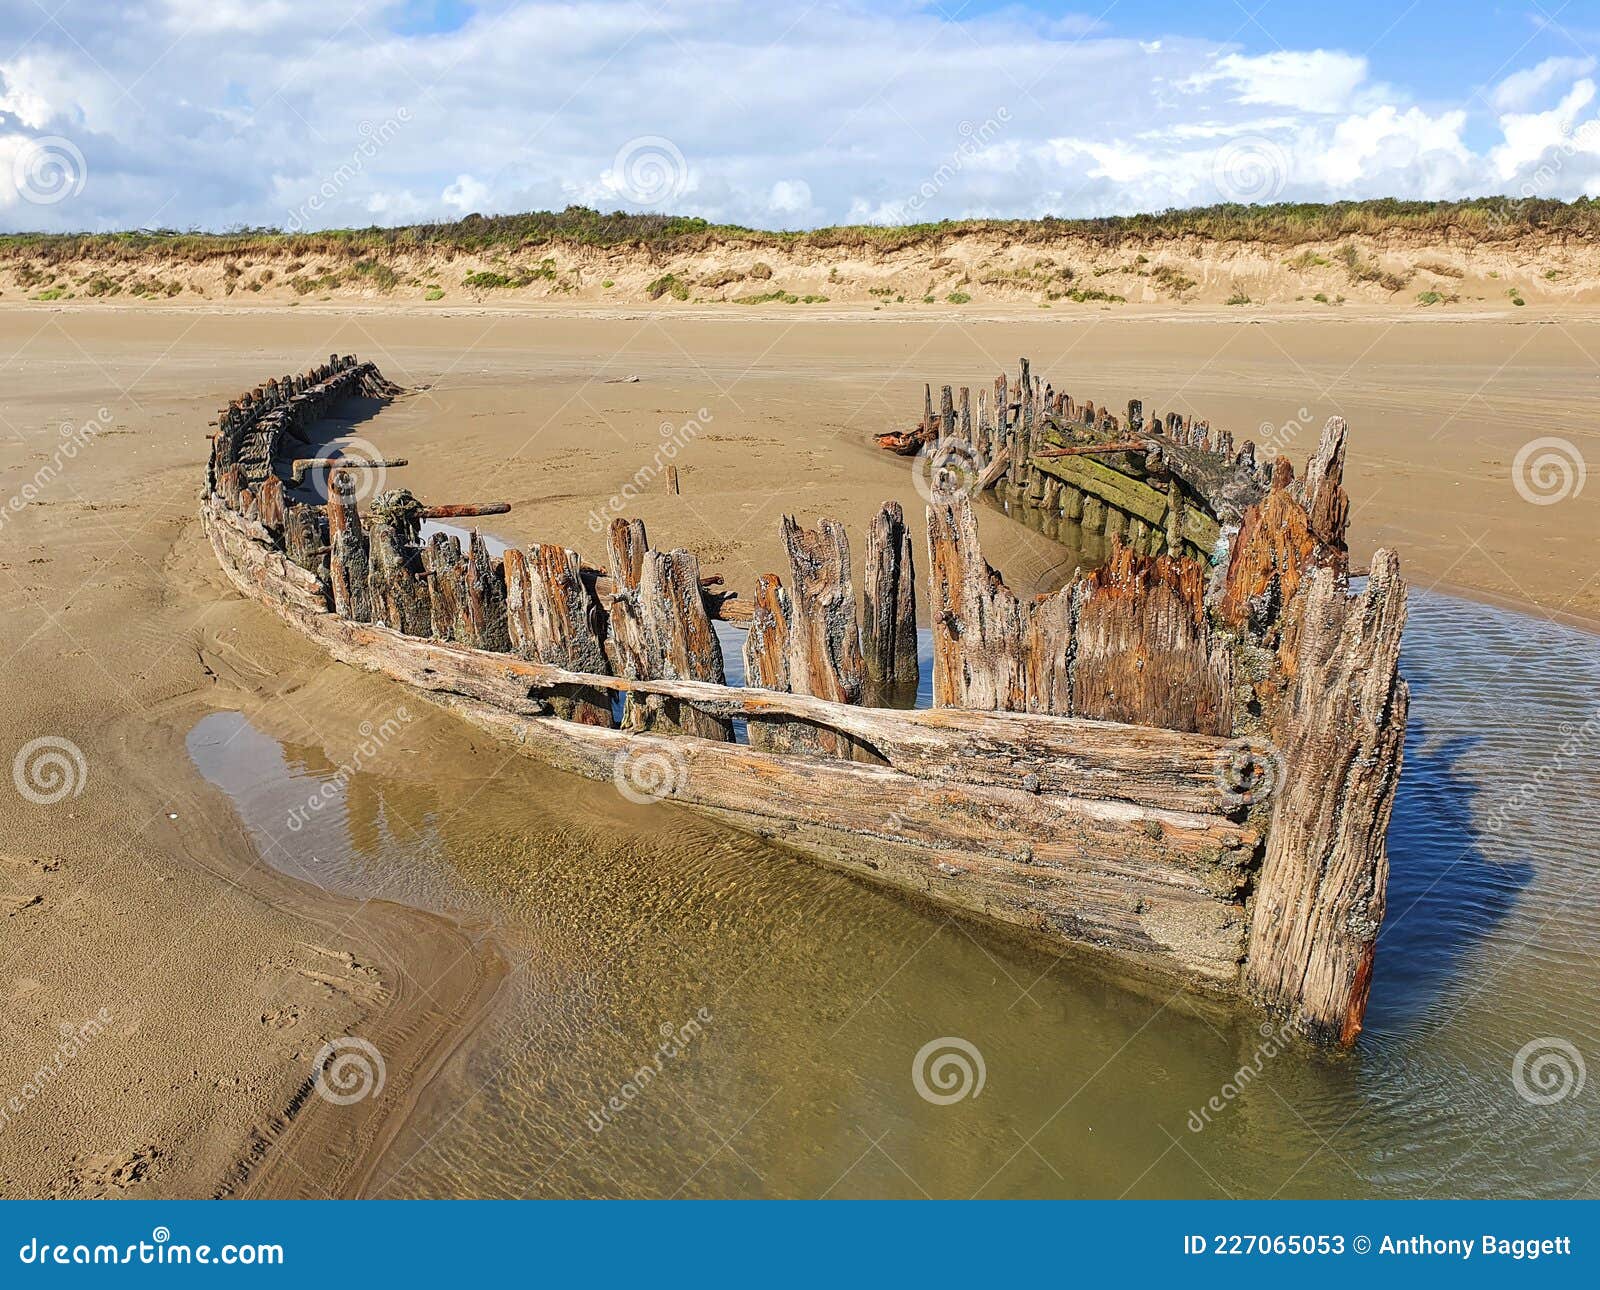 shipwreck on the cefn sands beach at pembrey country park in carmarthenshire south wales